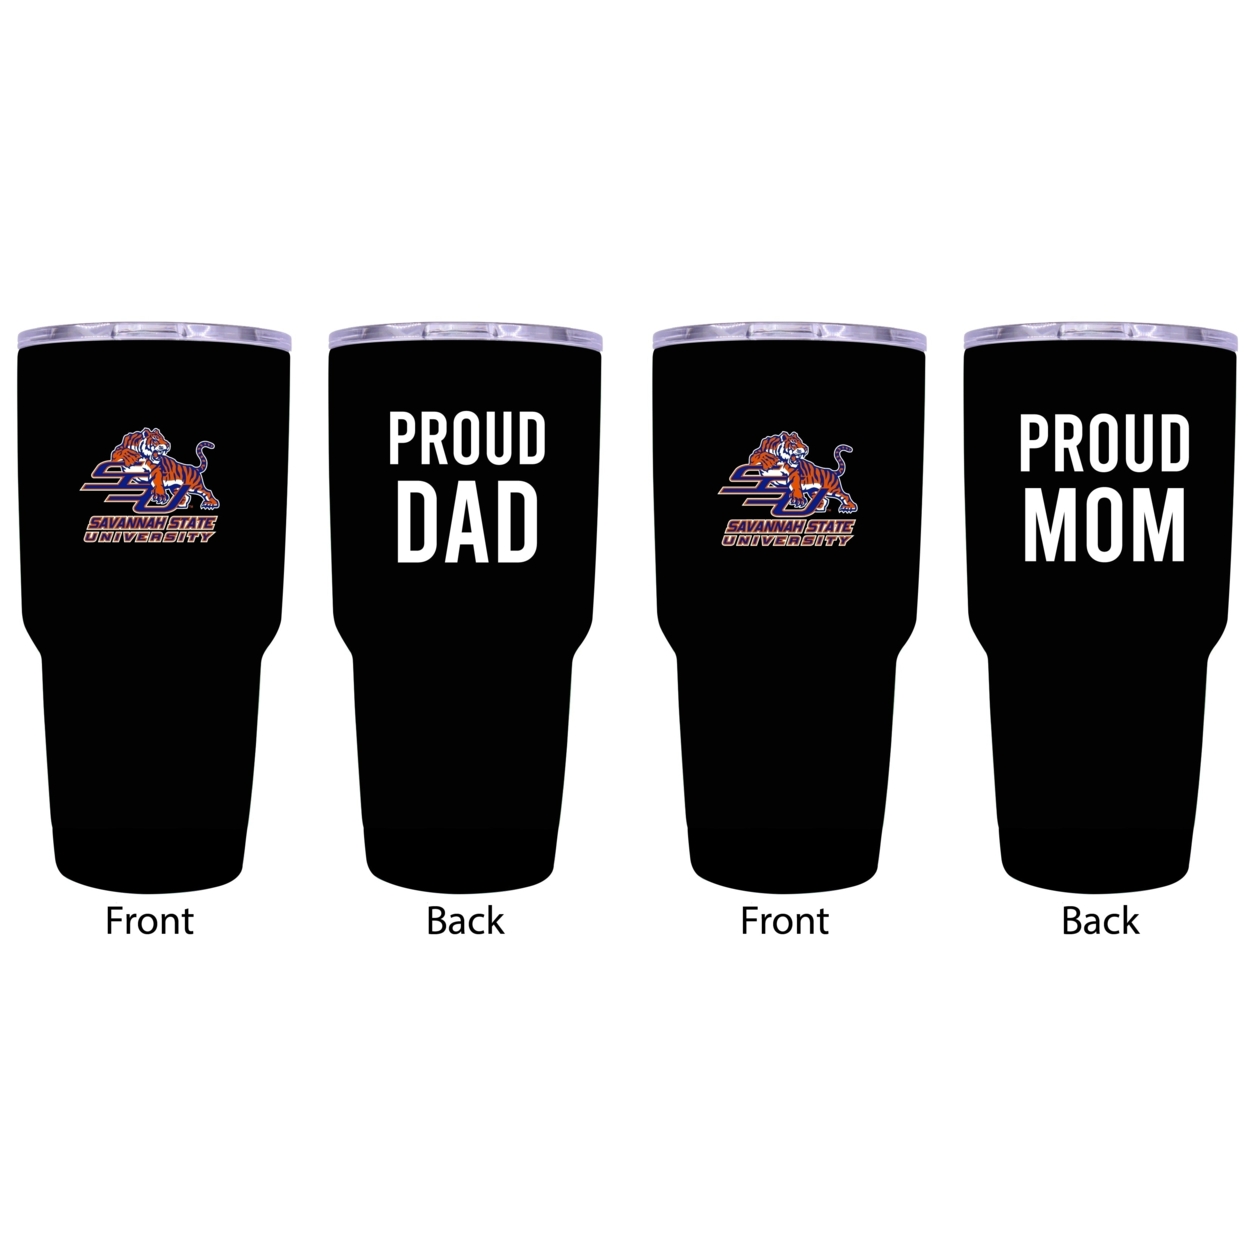 Savannah State University Proud Mom And Dad 24 Oz Insulated Stainless Steel Tumblers 2 Pack Black.